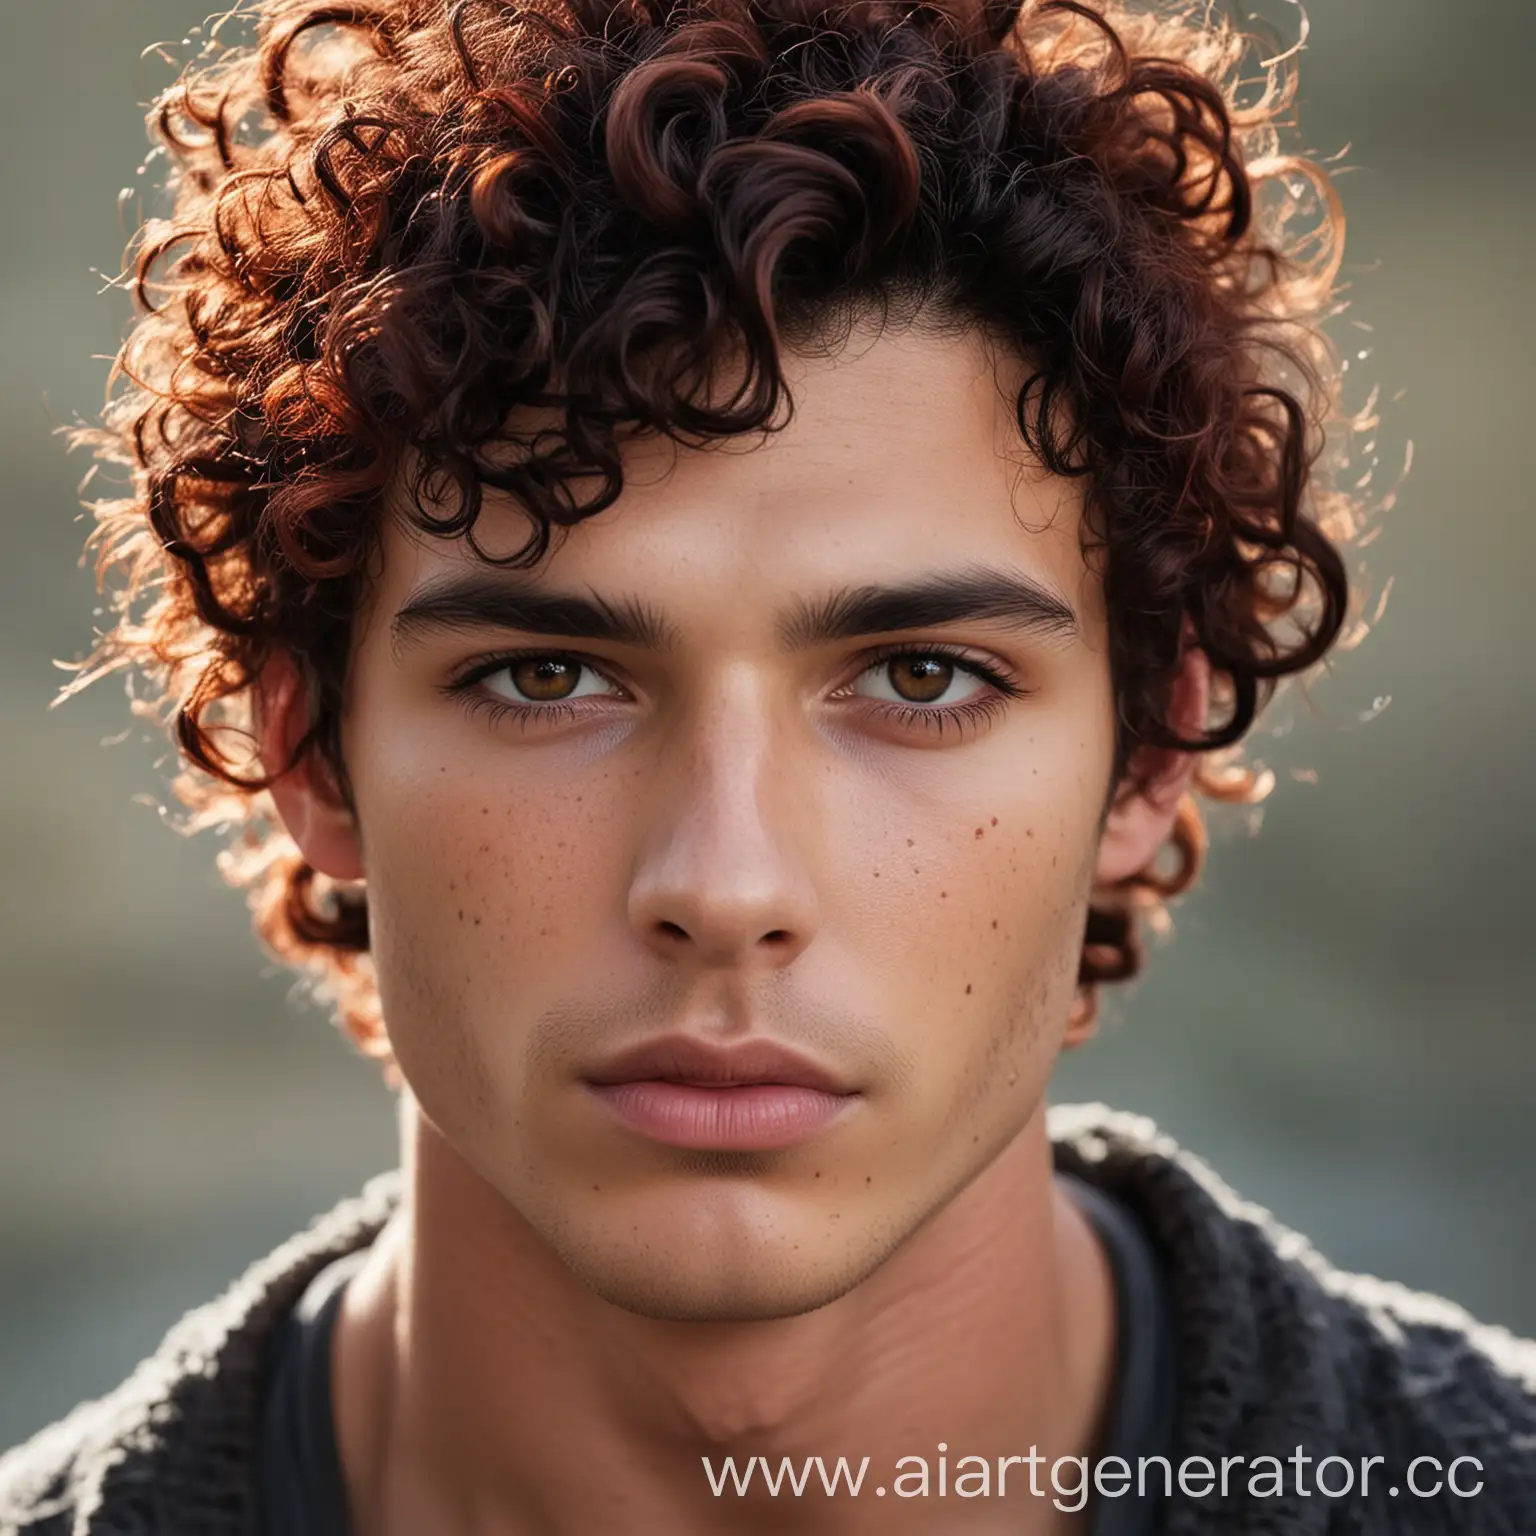 Dramatic-Portrait-of-a-BlackHaired-Man-with-Curly-Red-Hair-and-Intense-Expression